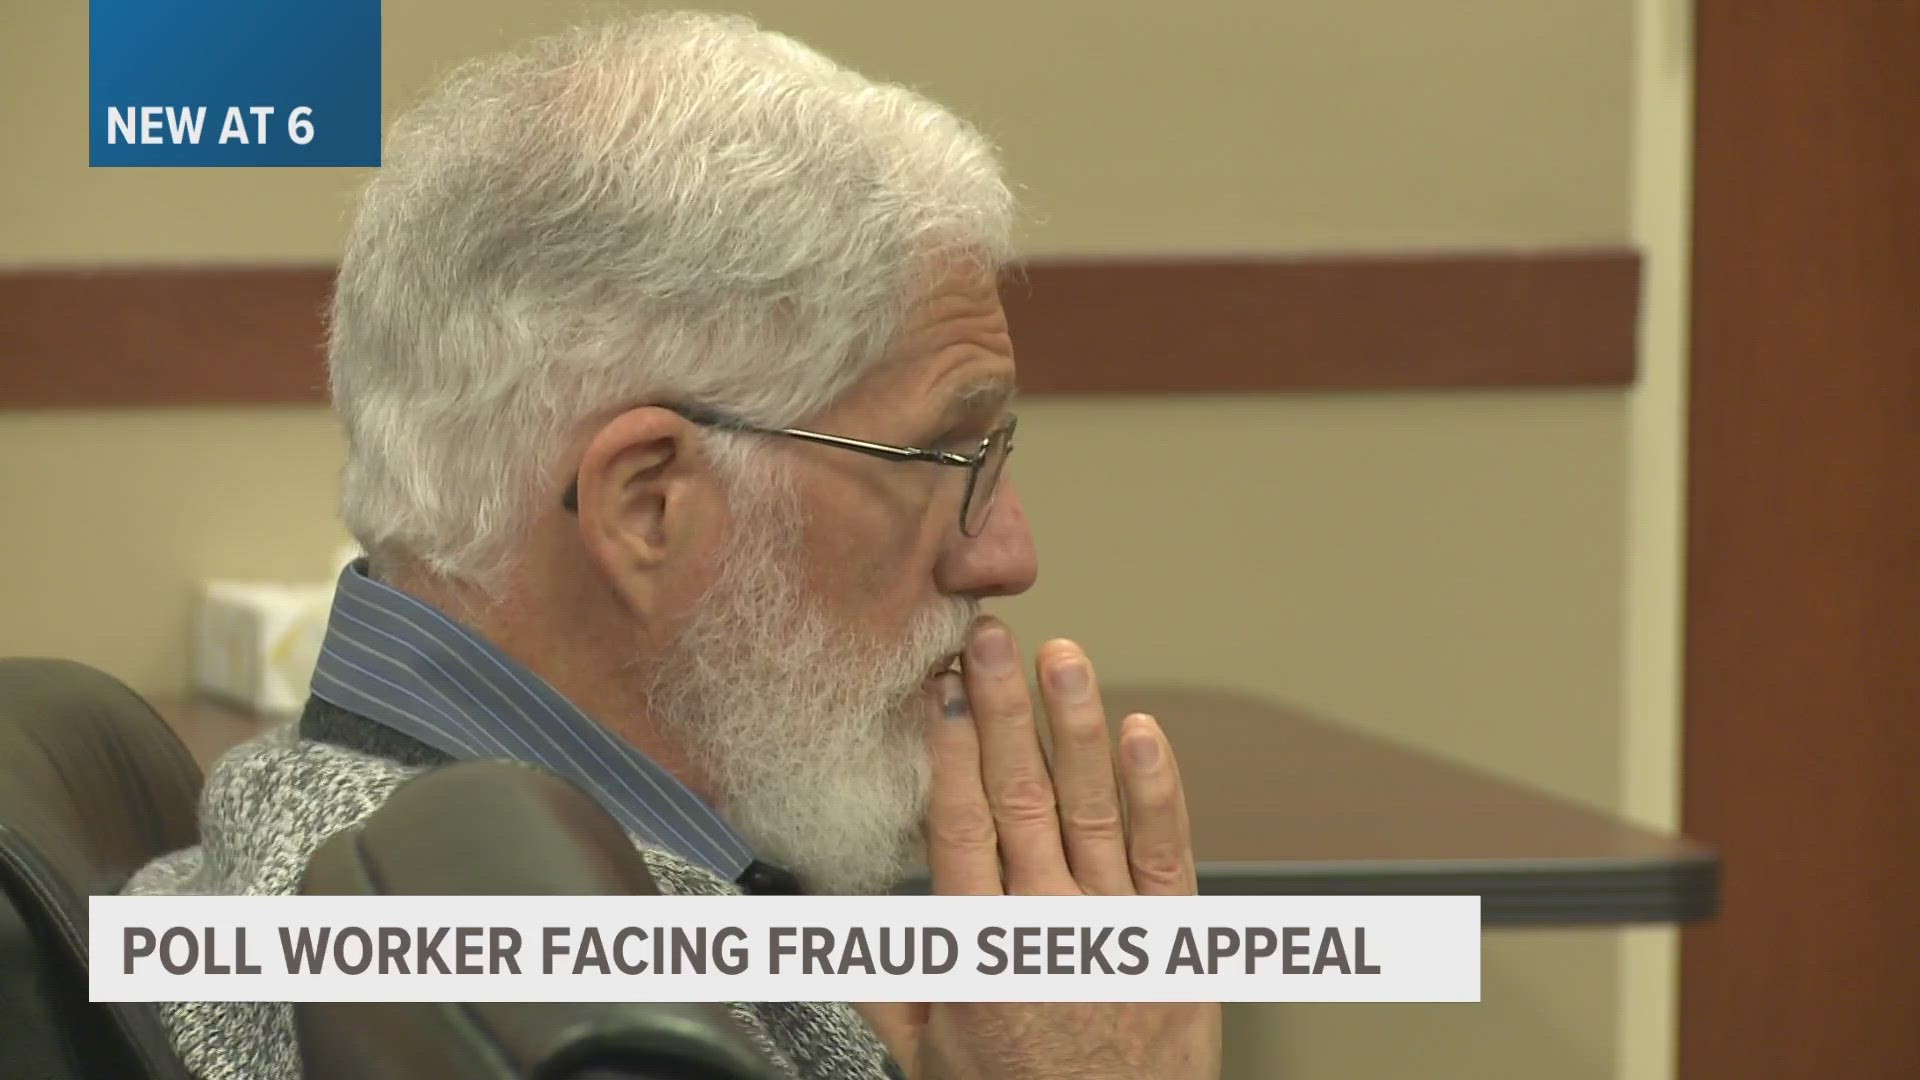 James Hoelkeboer is facing an election fraud charge in the Kent Co. 63rd District Court.